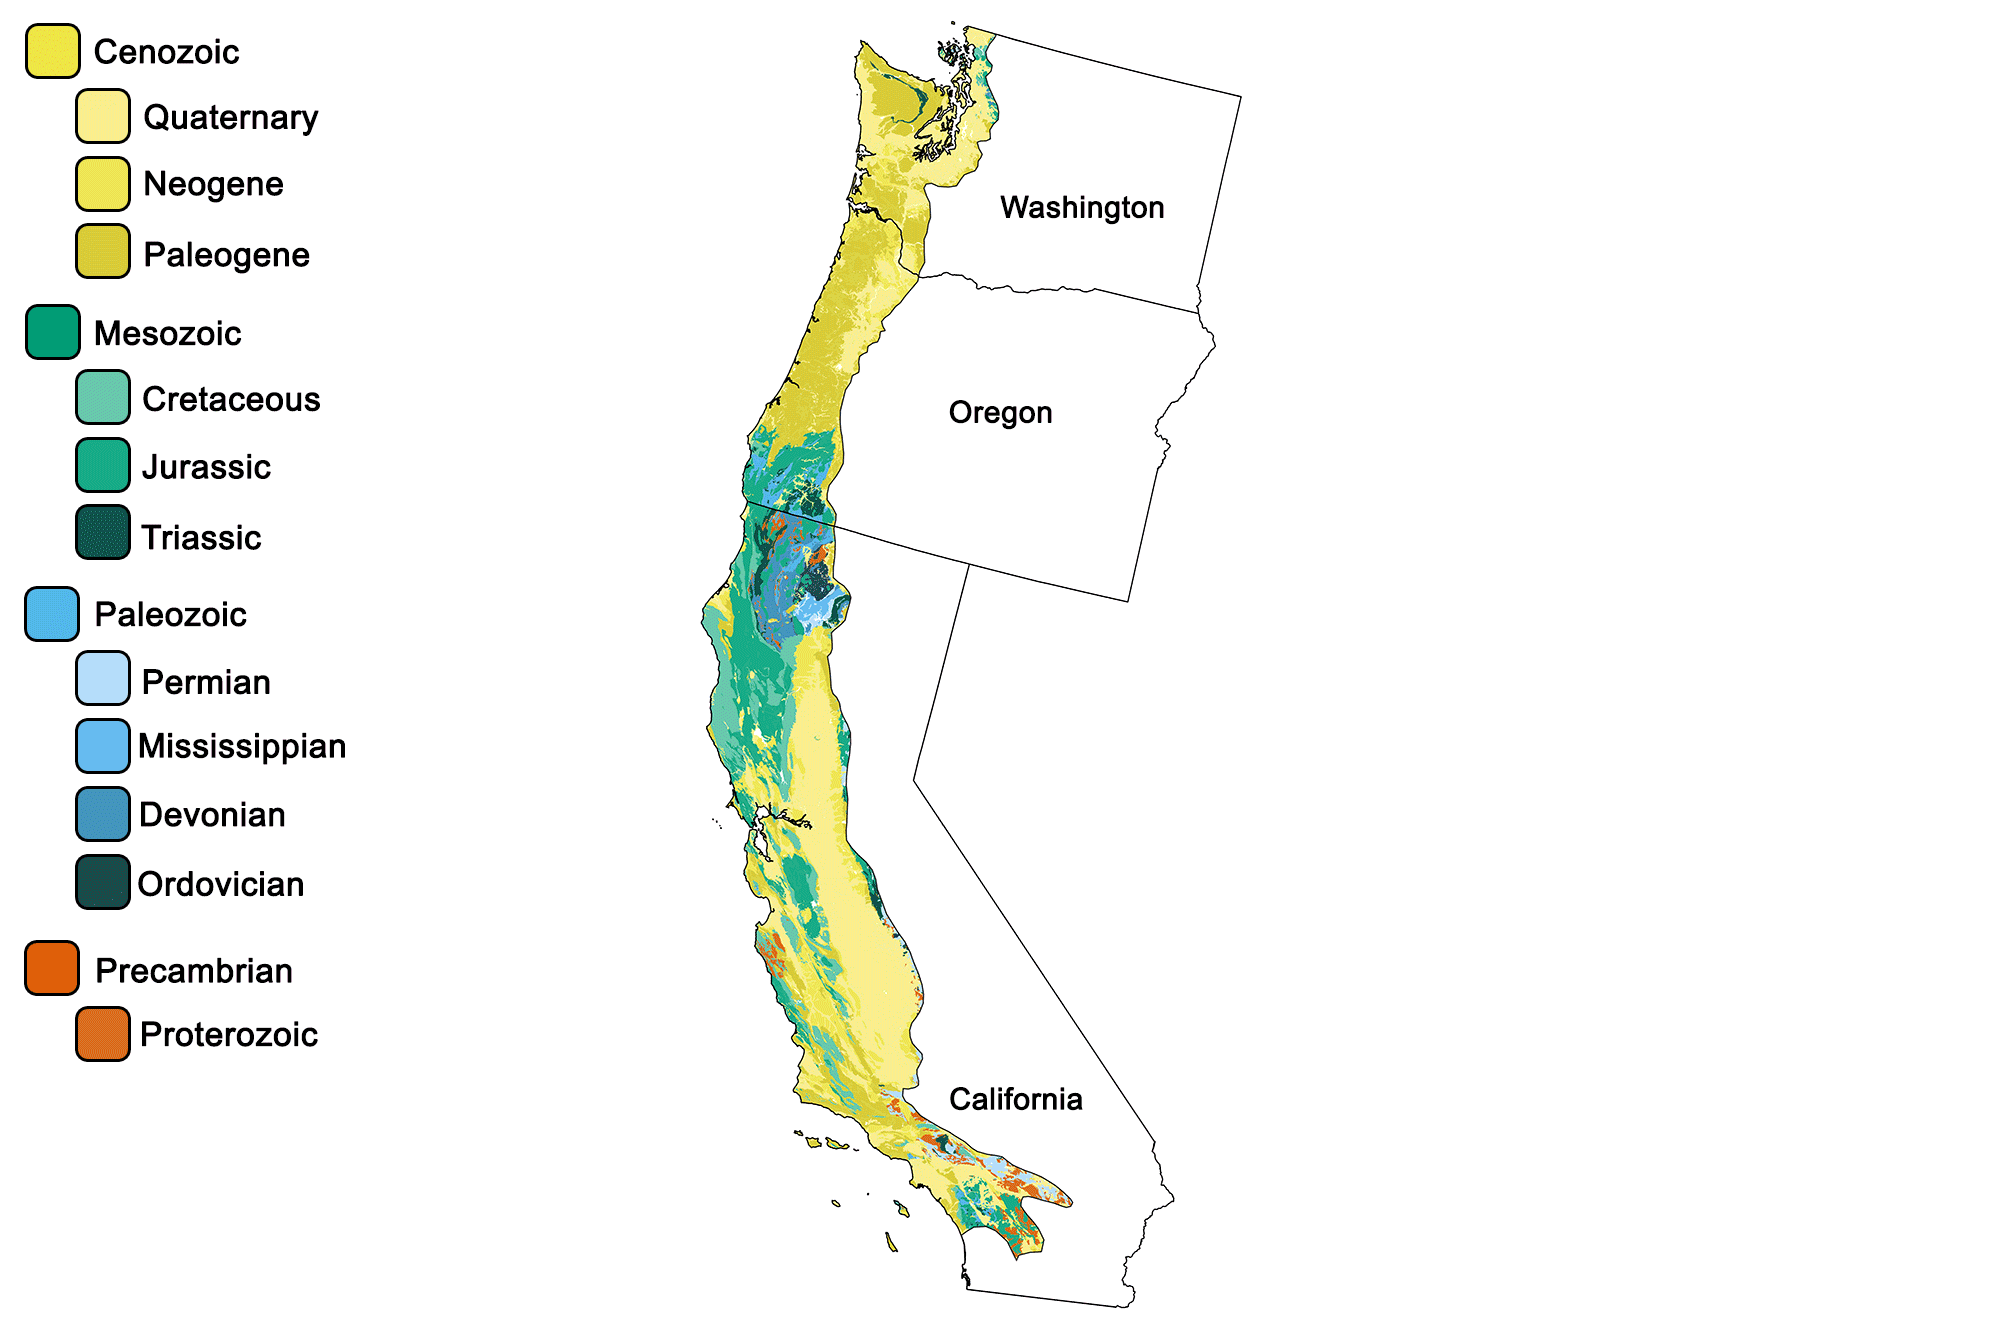 Geologic map of the Pacific Border region of the western United States.